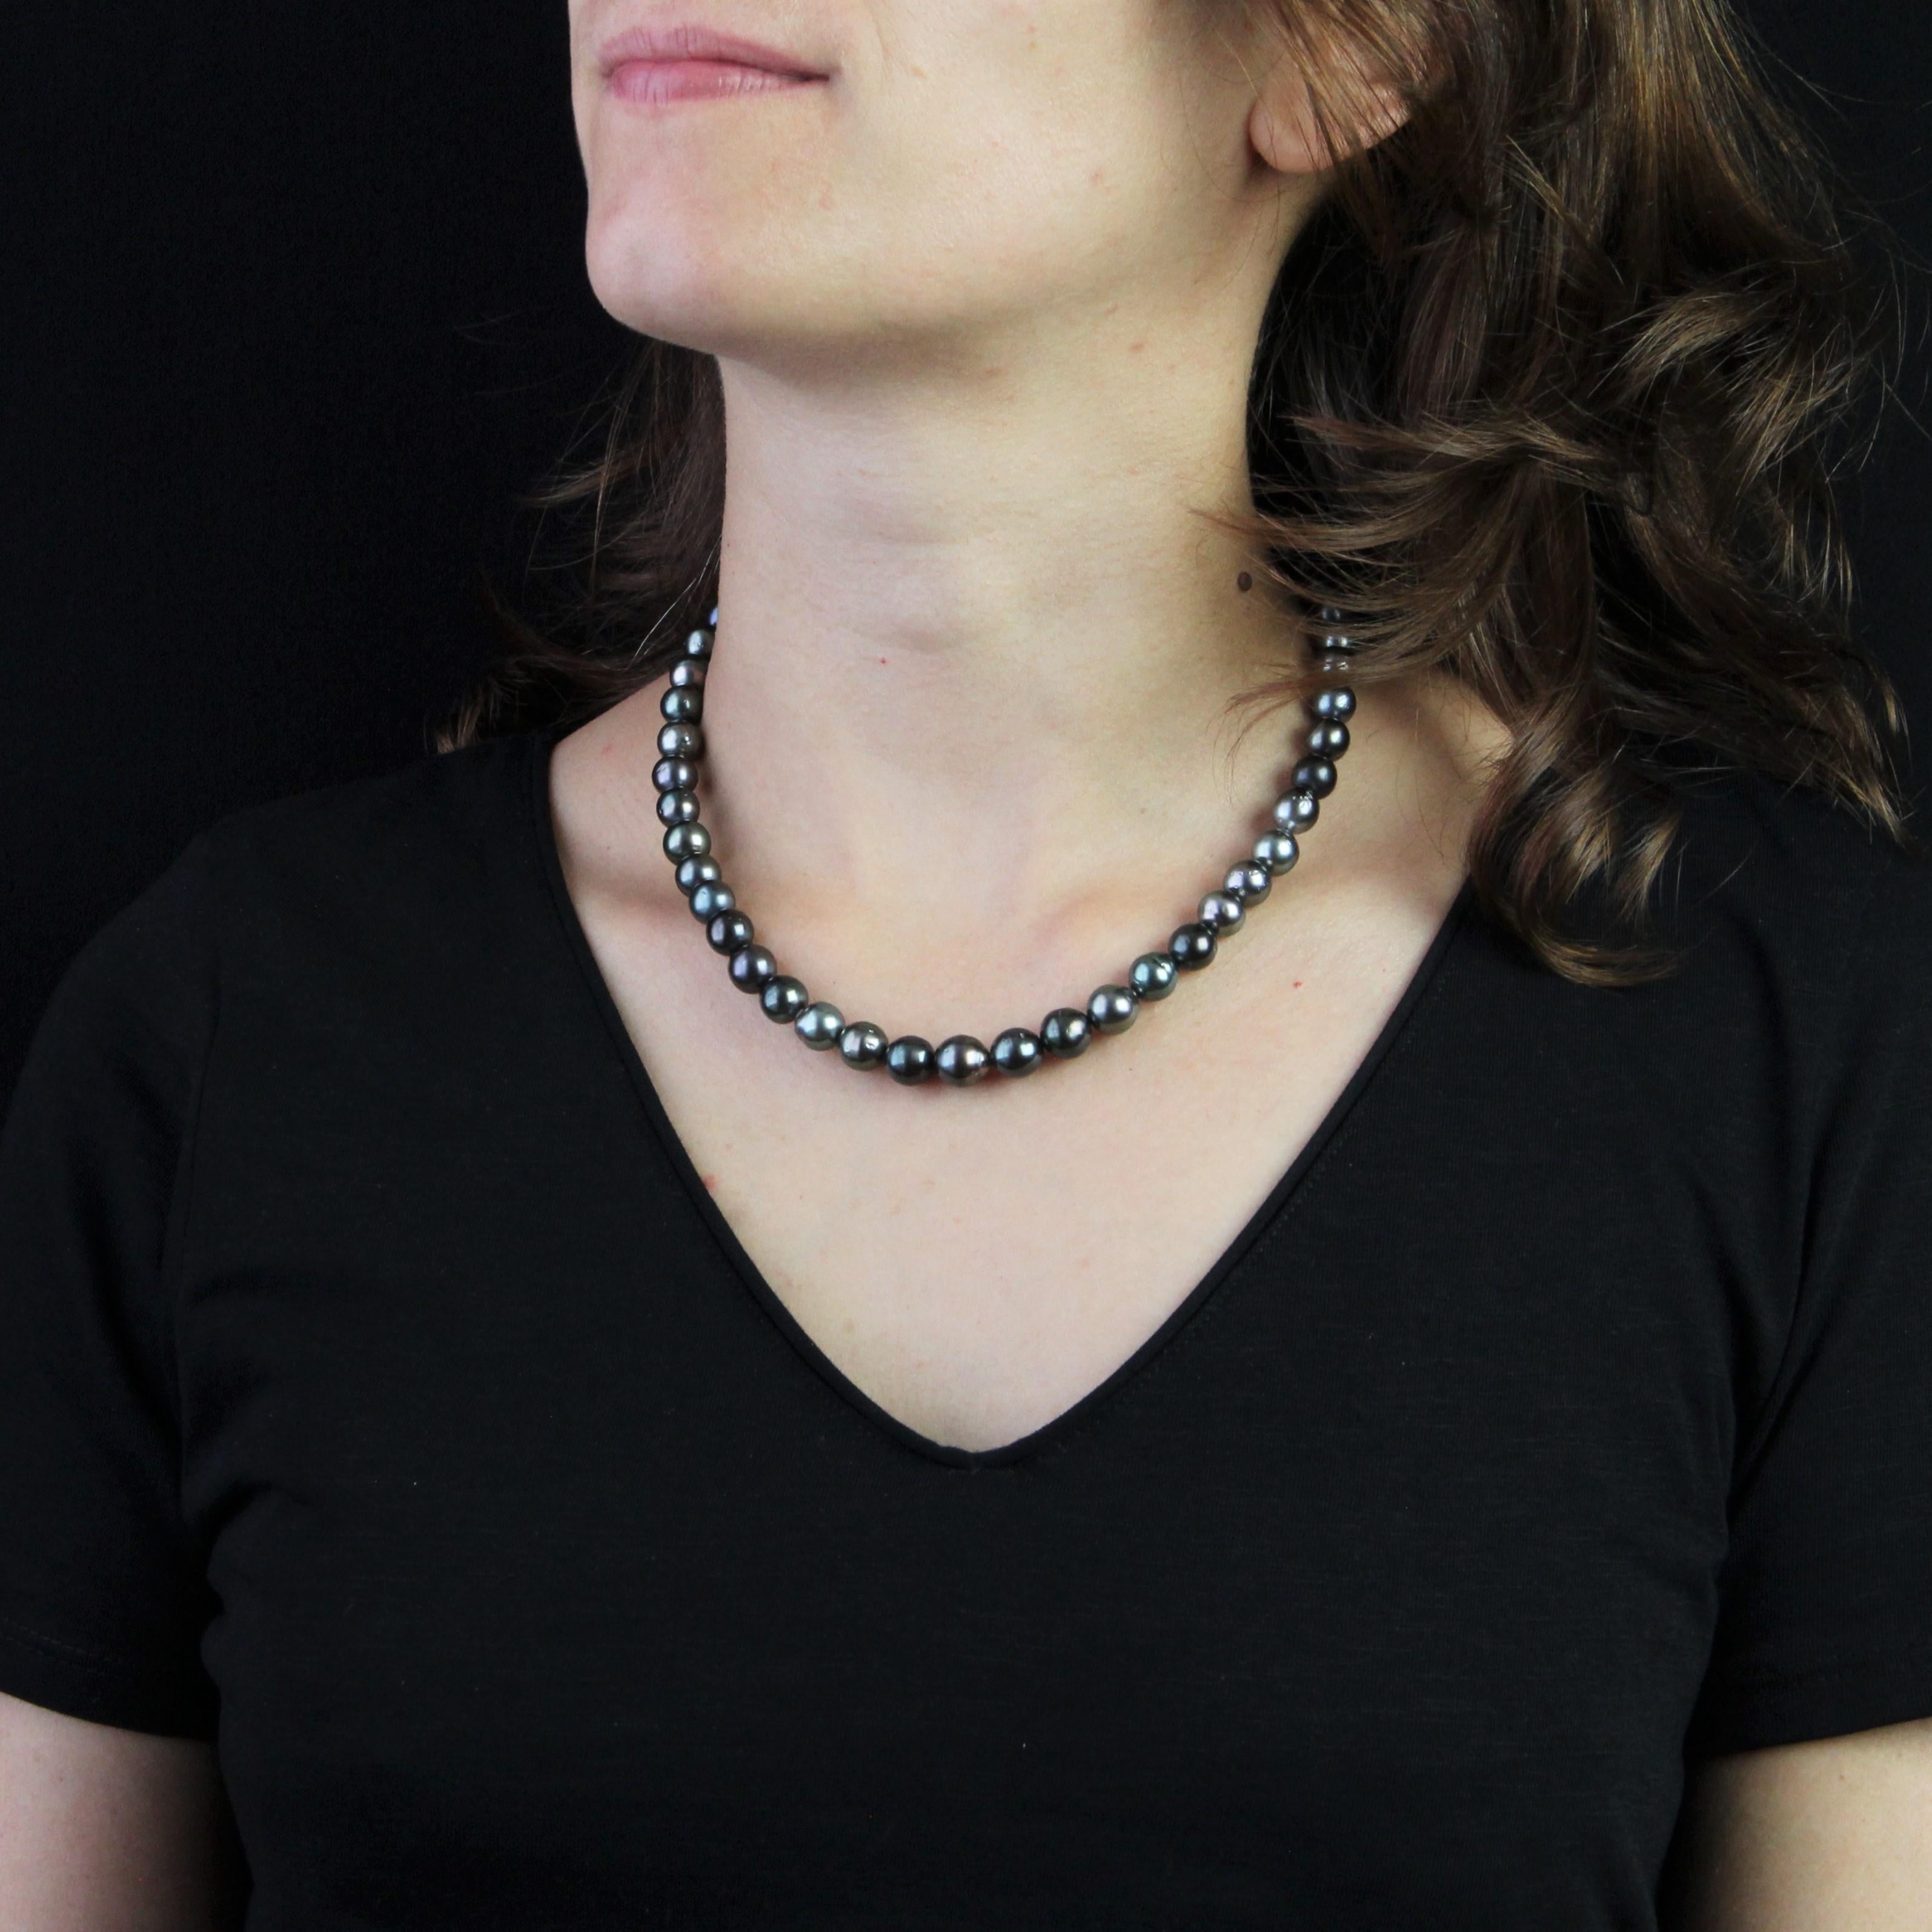 Necklace of grey Tahitian pearls in light fall threaded on steel wire. The clasp is a snap hook in 18 karat yellow gold.
The color of the pearls ranges from metallic dark gray, to bronze and copper greens, to eggplant. The pearls are almost round to